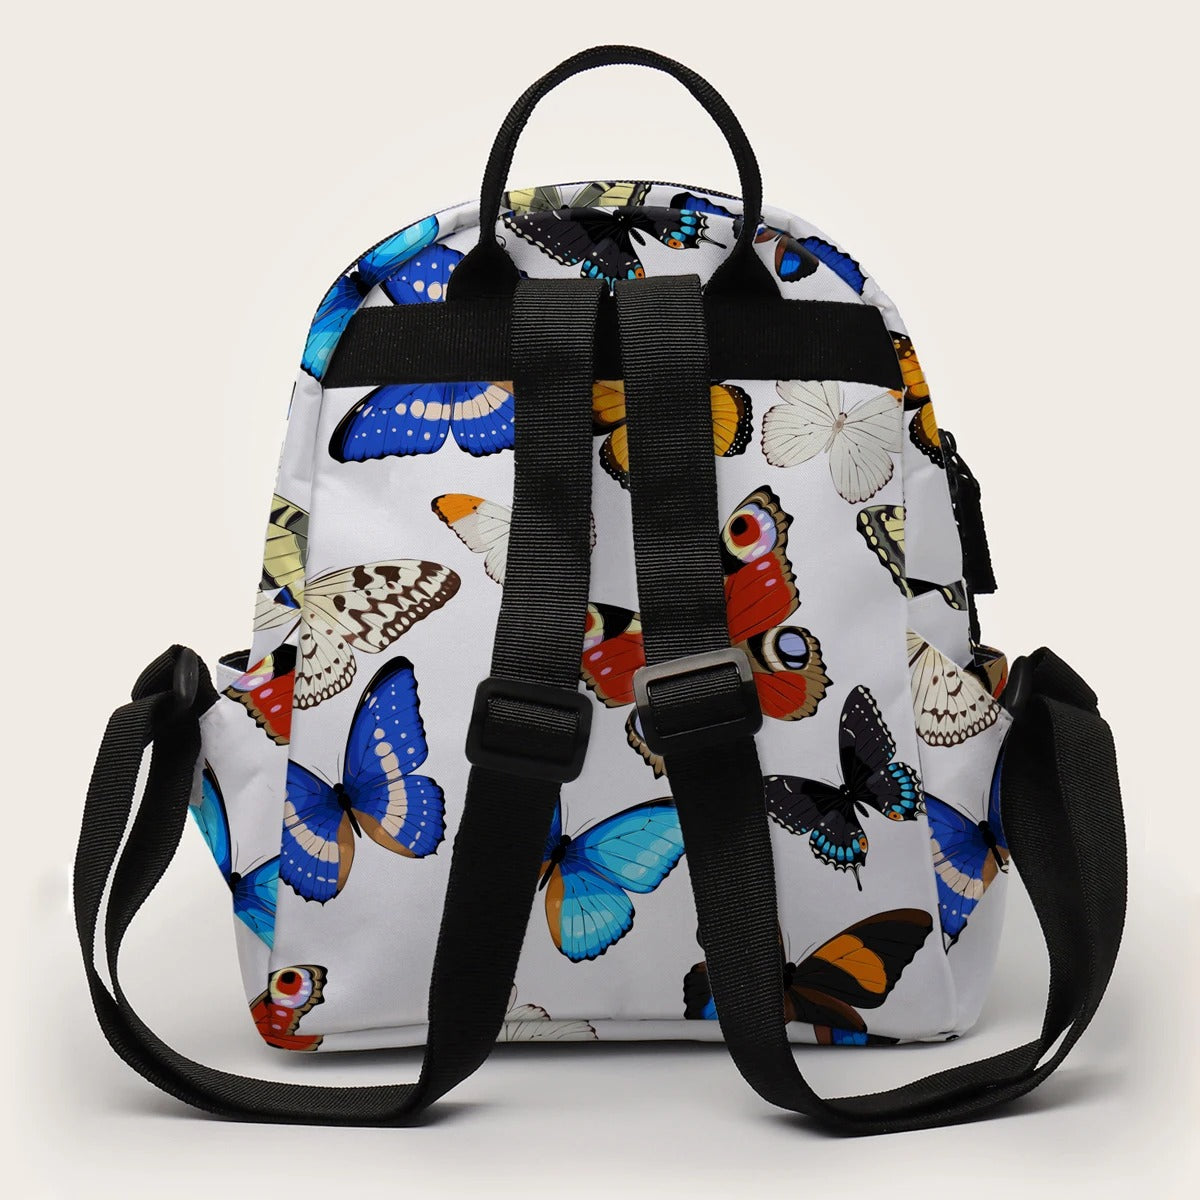 Butterfly Backpack for School - MNSB - 24